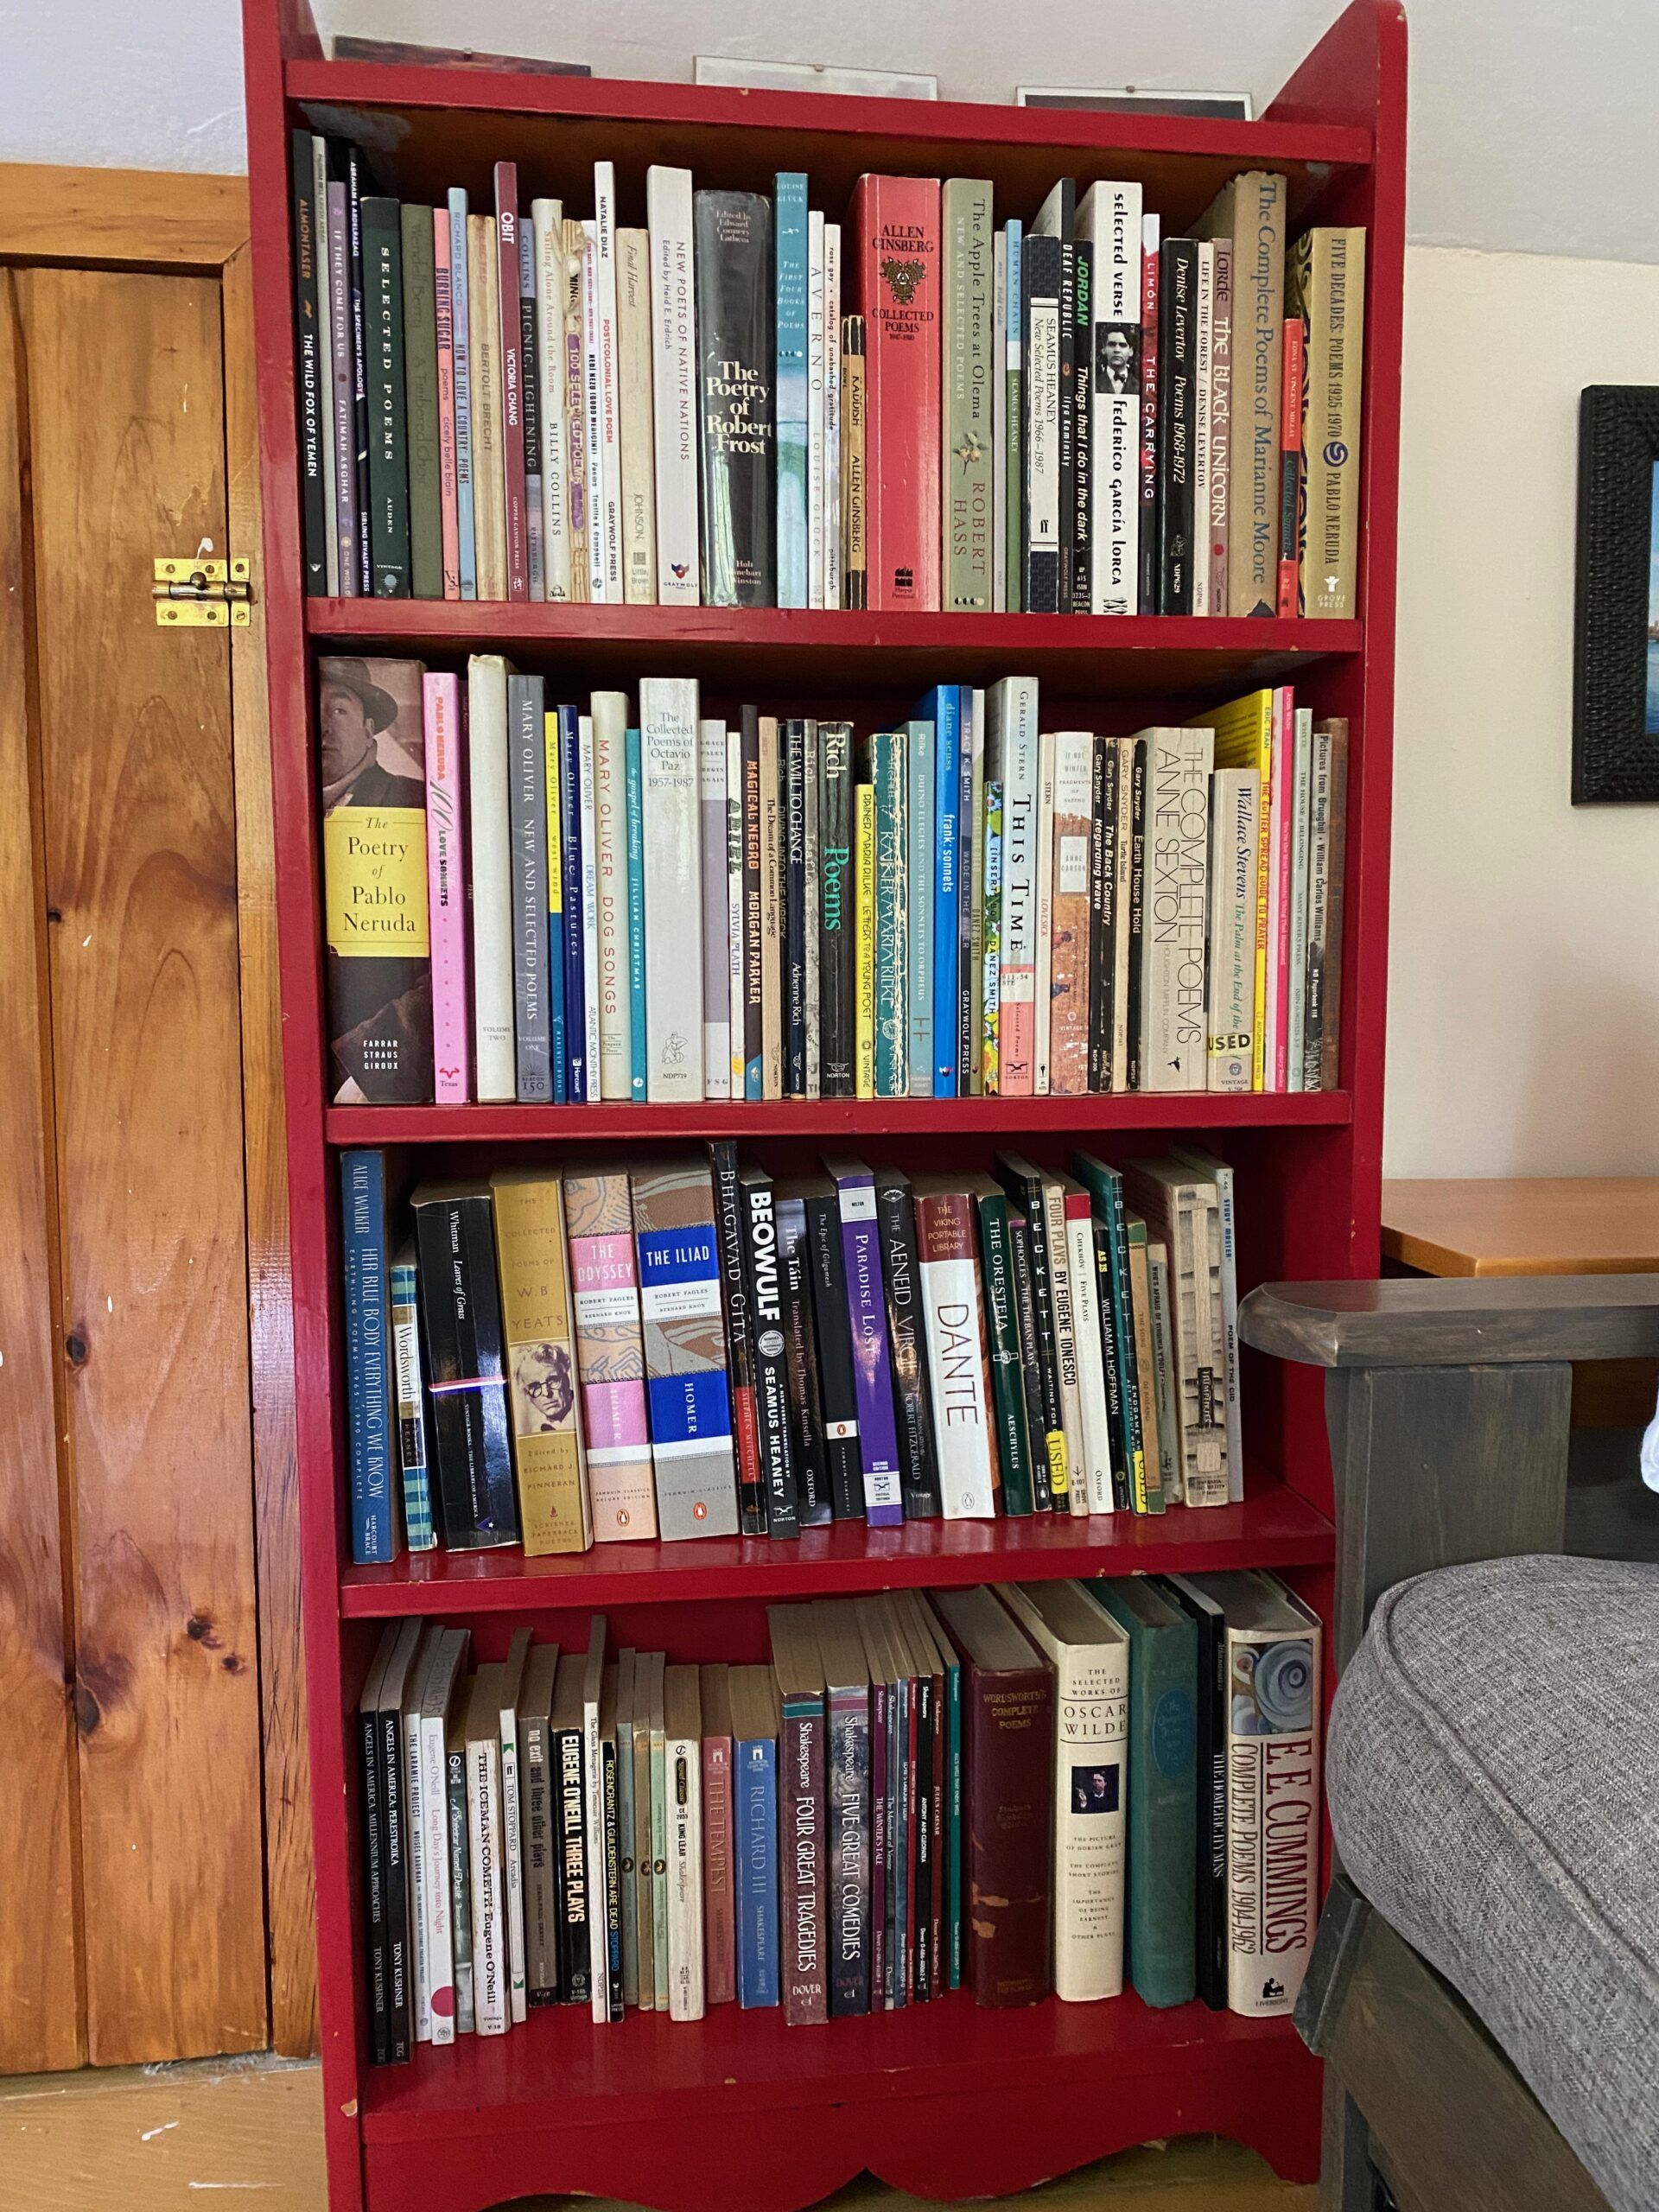 A red bookshelf full of books, mostly poetry and plays. 